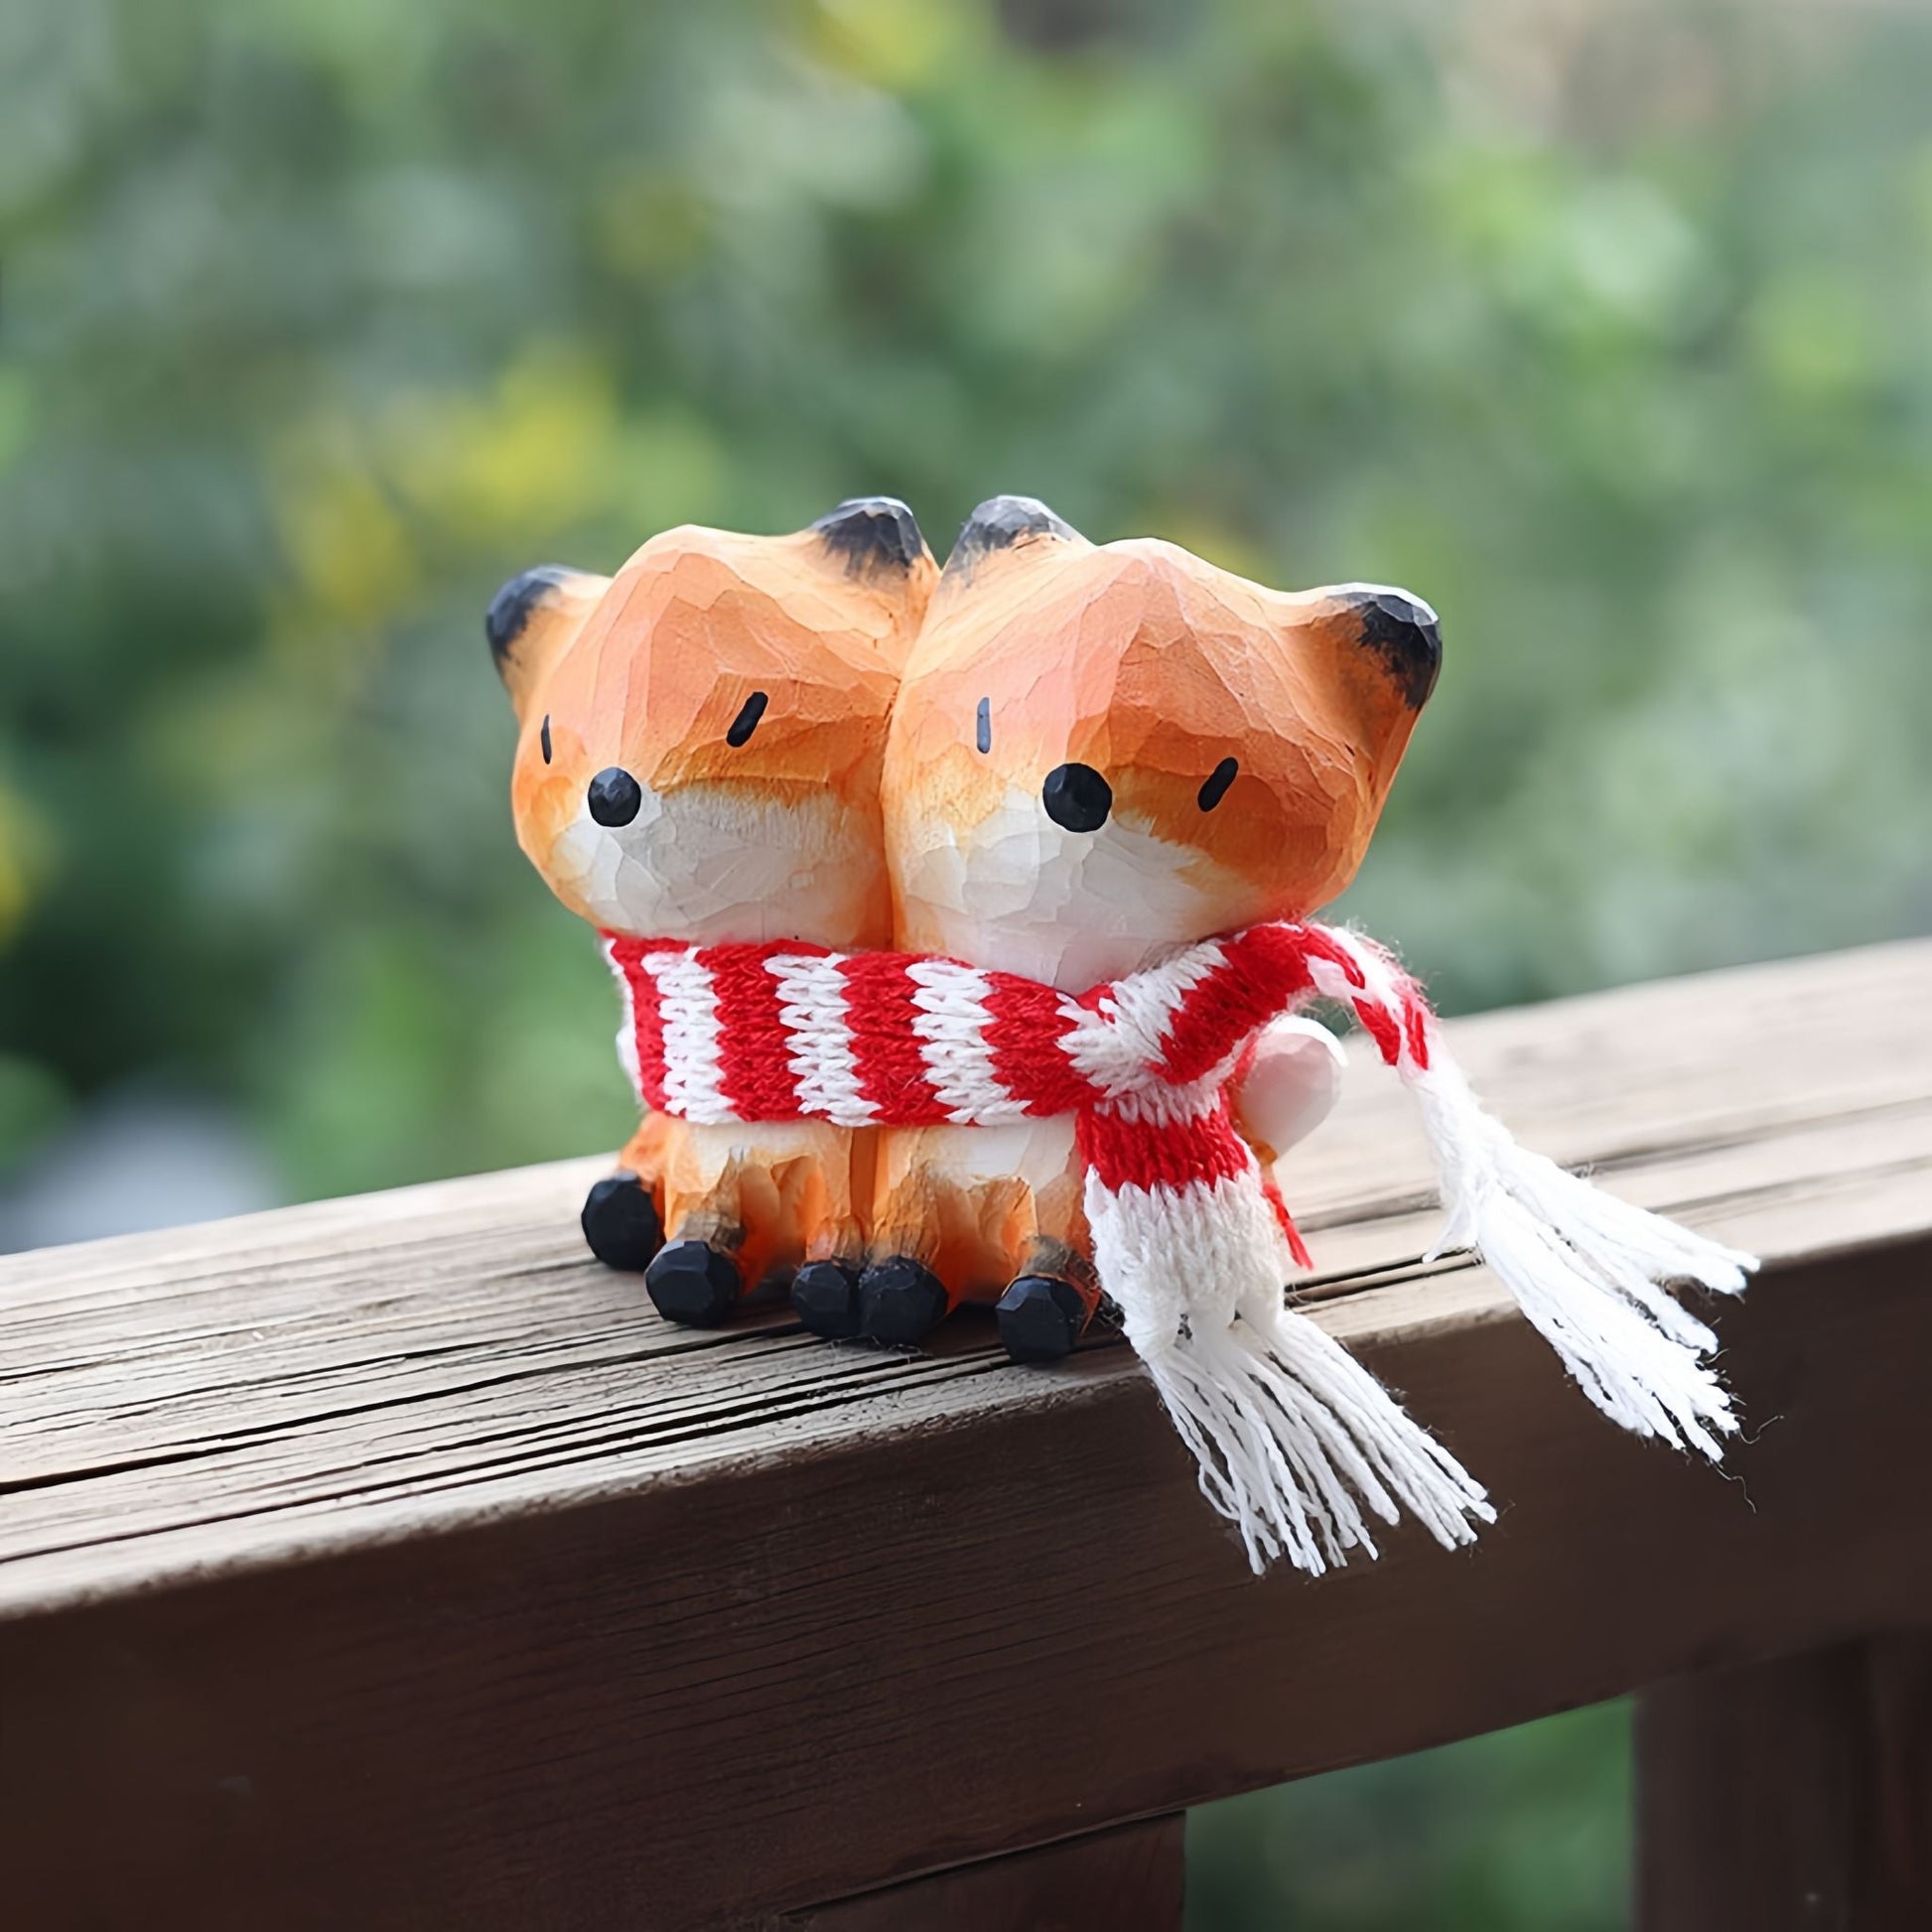 Fox Couple Wooden Statues with Scarves - Wooden Islands